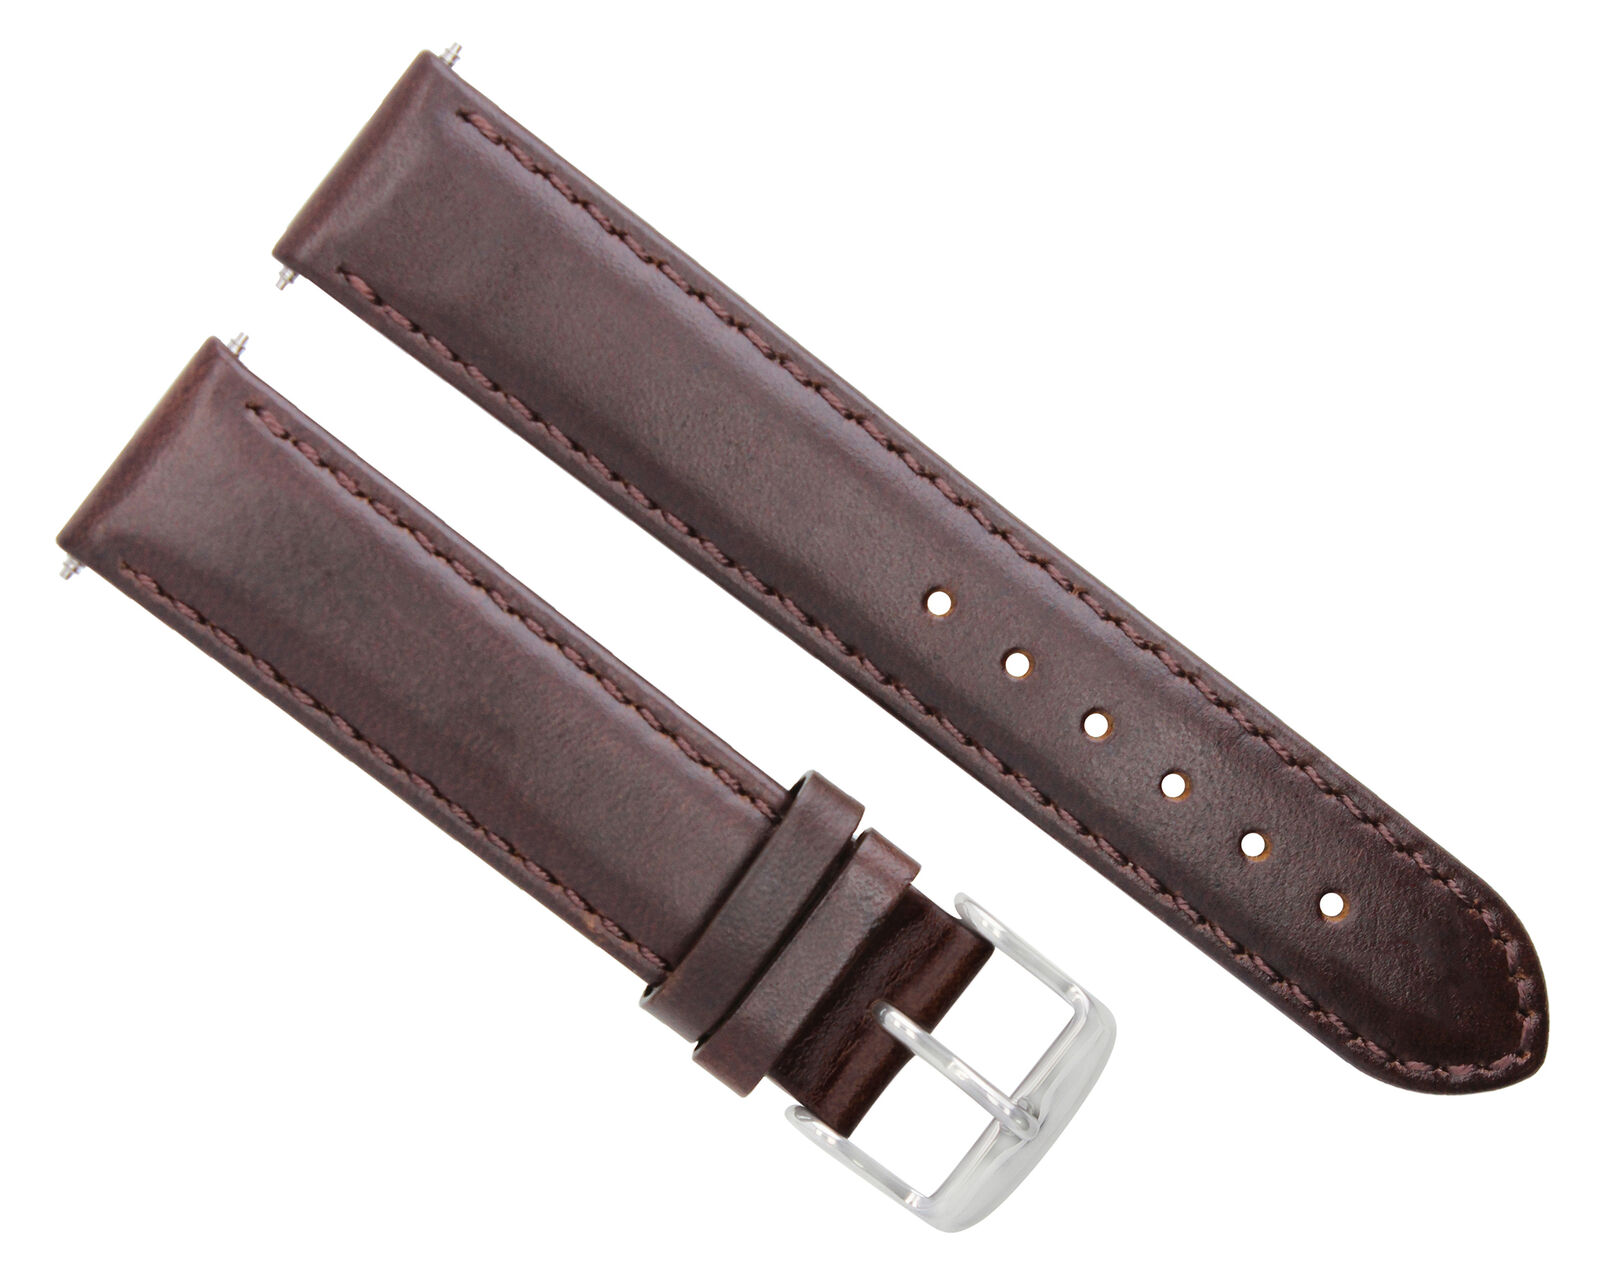 22MM GENUINE SMOOTH LEATHER WATCH BAND STRAP FOR IWC PILOT PORTUGUESE DARK BROWN